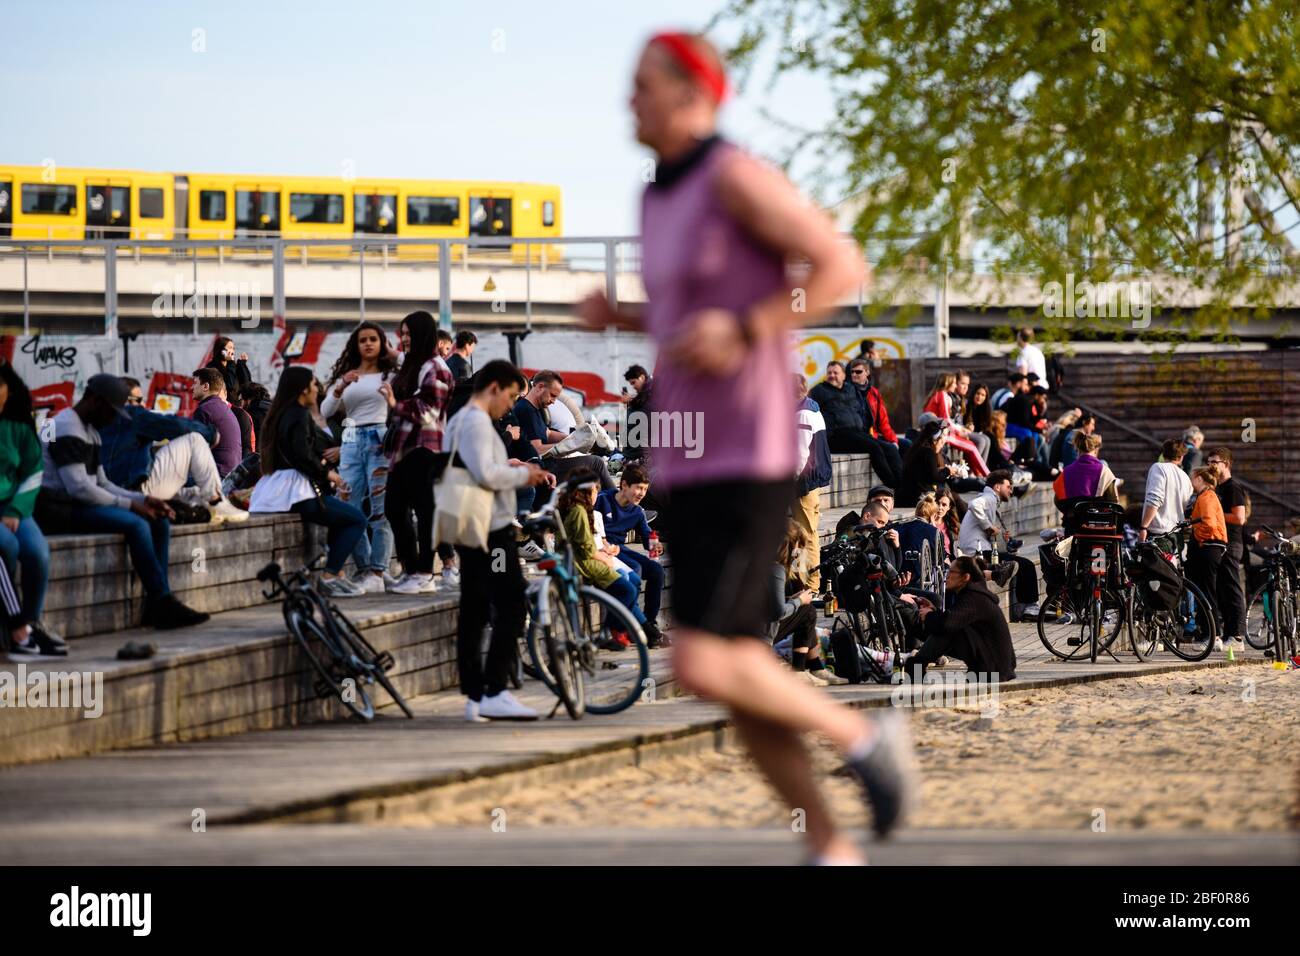 April 16, 2020: Crowds of people sit on wooden steps in Berlin's Gleisdreieckpark despite the ban of contact. People living in the city of Berlin have to stay in their flats or usual accommodation to contain the coronavirus, meetings of more than 2 persons are forbidden, people are asked to keep a minimum distance. Credit: Jan Scheunert/ZUMA Wire/Alamy Live News Stock Photo